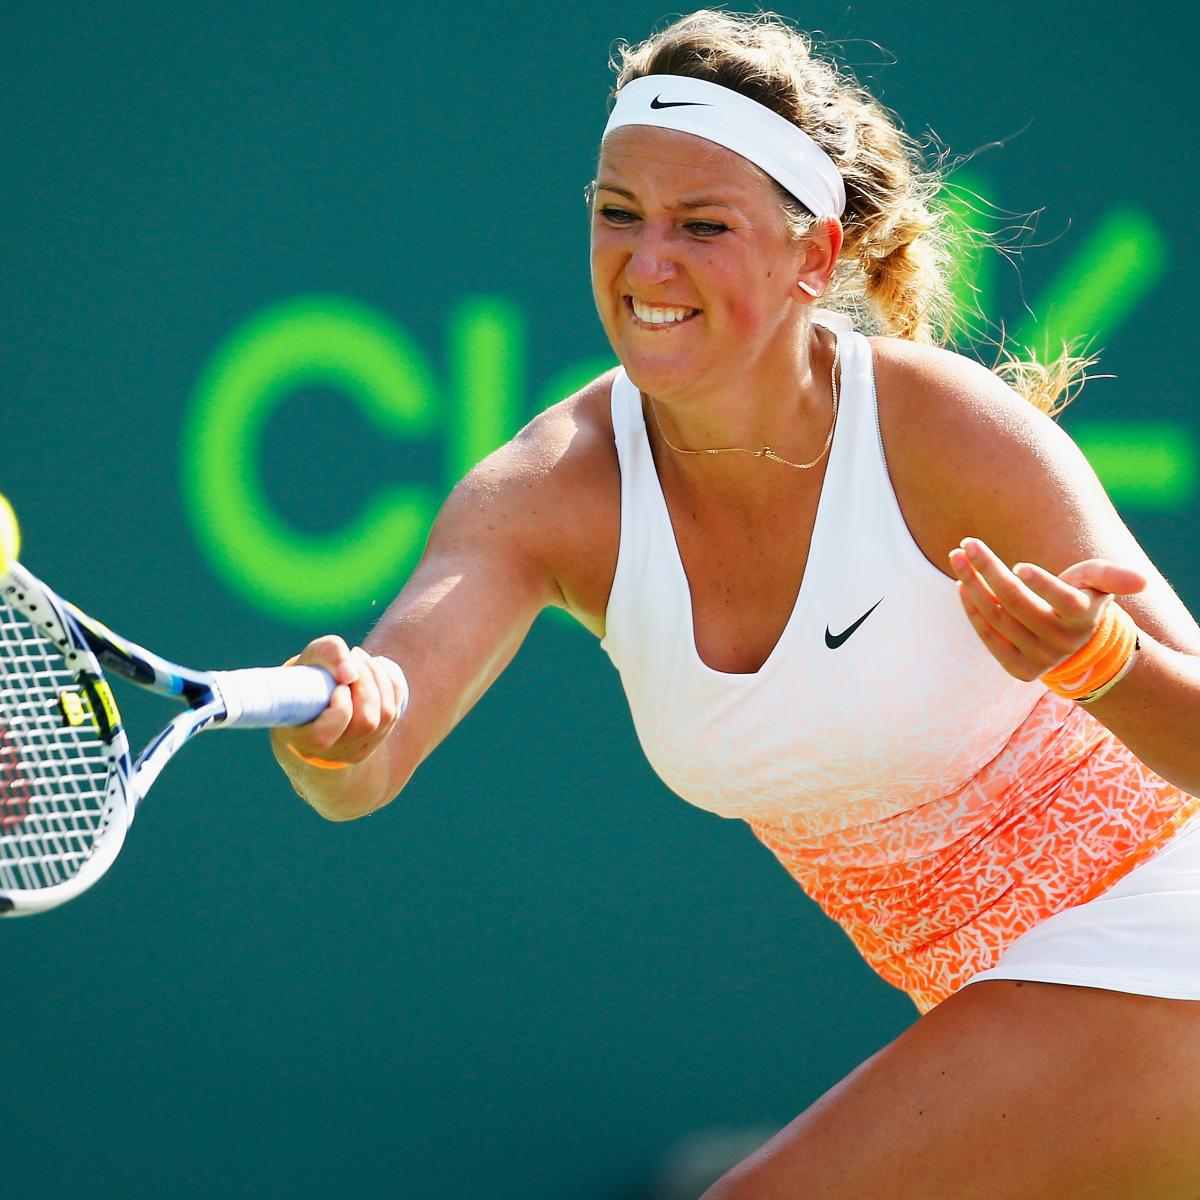 Miami Open Tennis 2015 Results Scores, Bracket and Schedule After